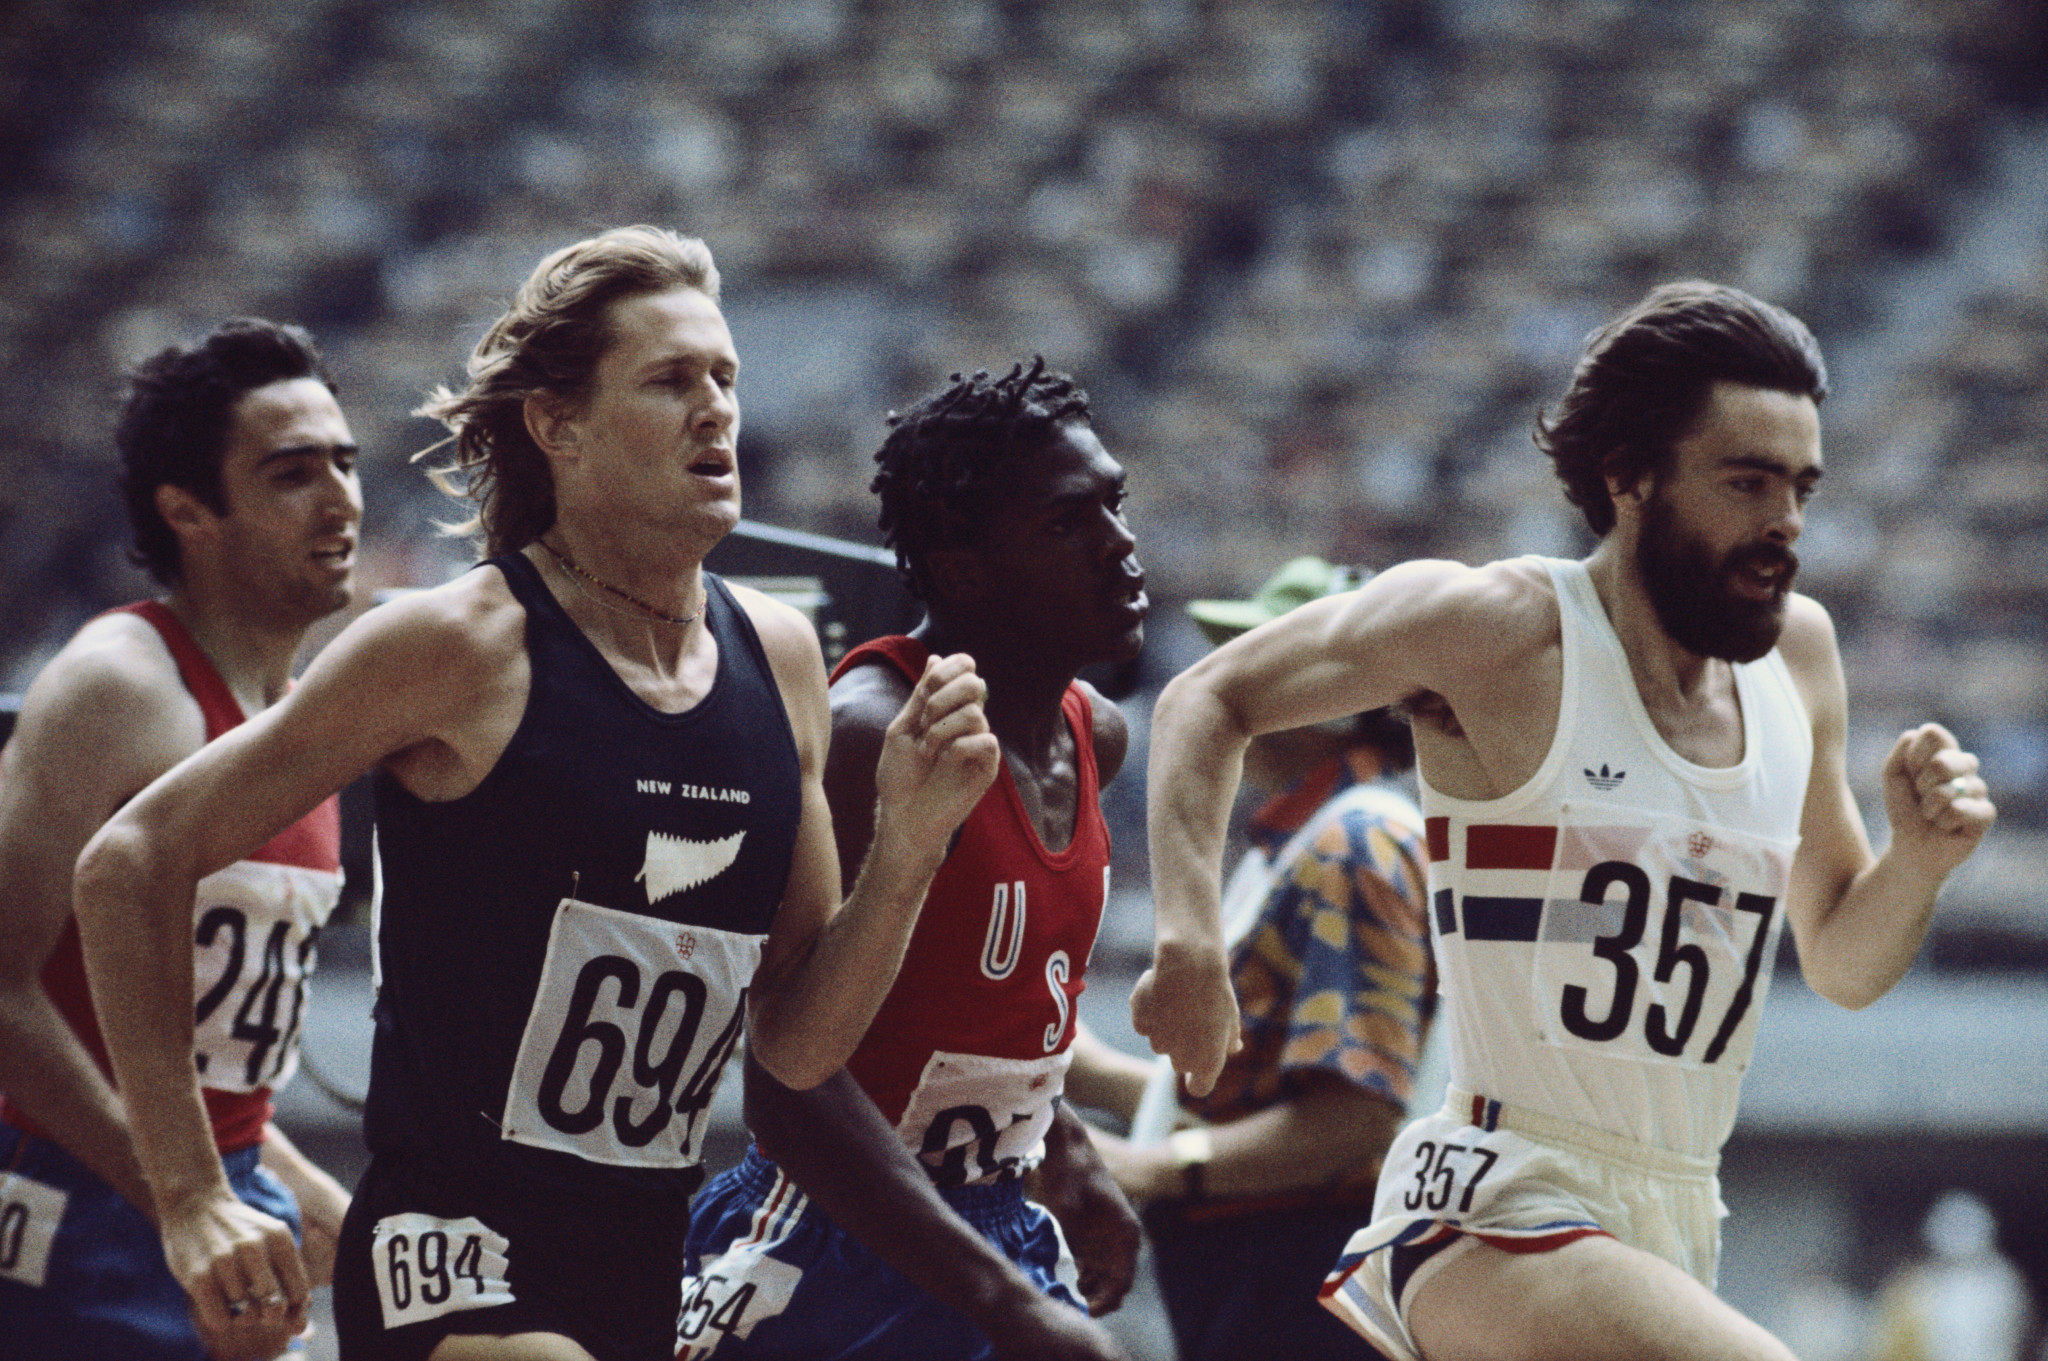 Sir John Walker won the men's 1500m title at the Montreal 1976 Olympic Games ©Getty Images